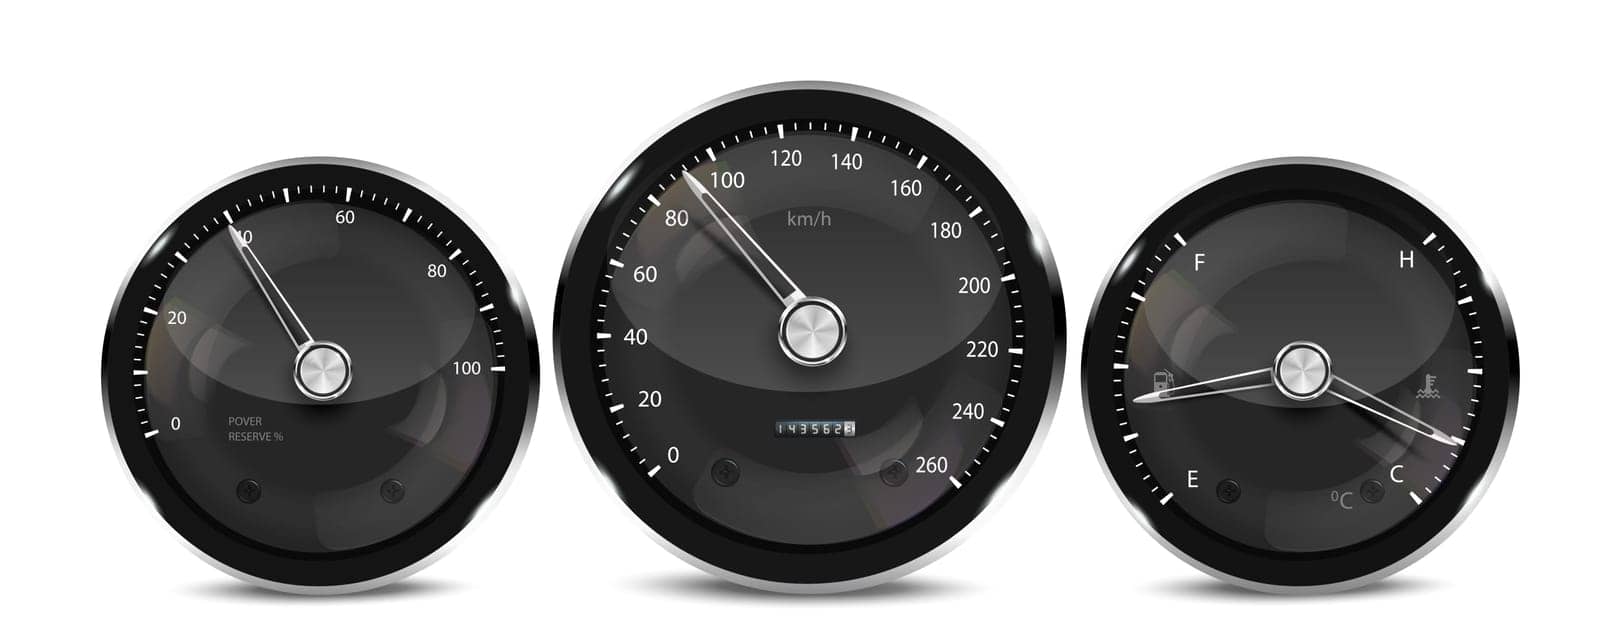 Car dashboard speedometer, tachometer, digital LED indicators for fuel and engine temperature. Vector realistic elements of car dashboard instrument cluster